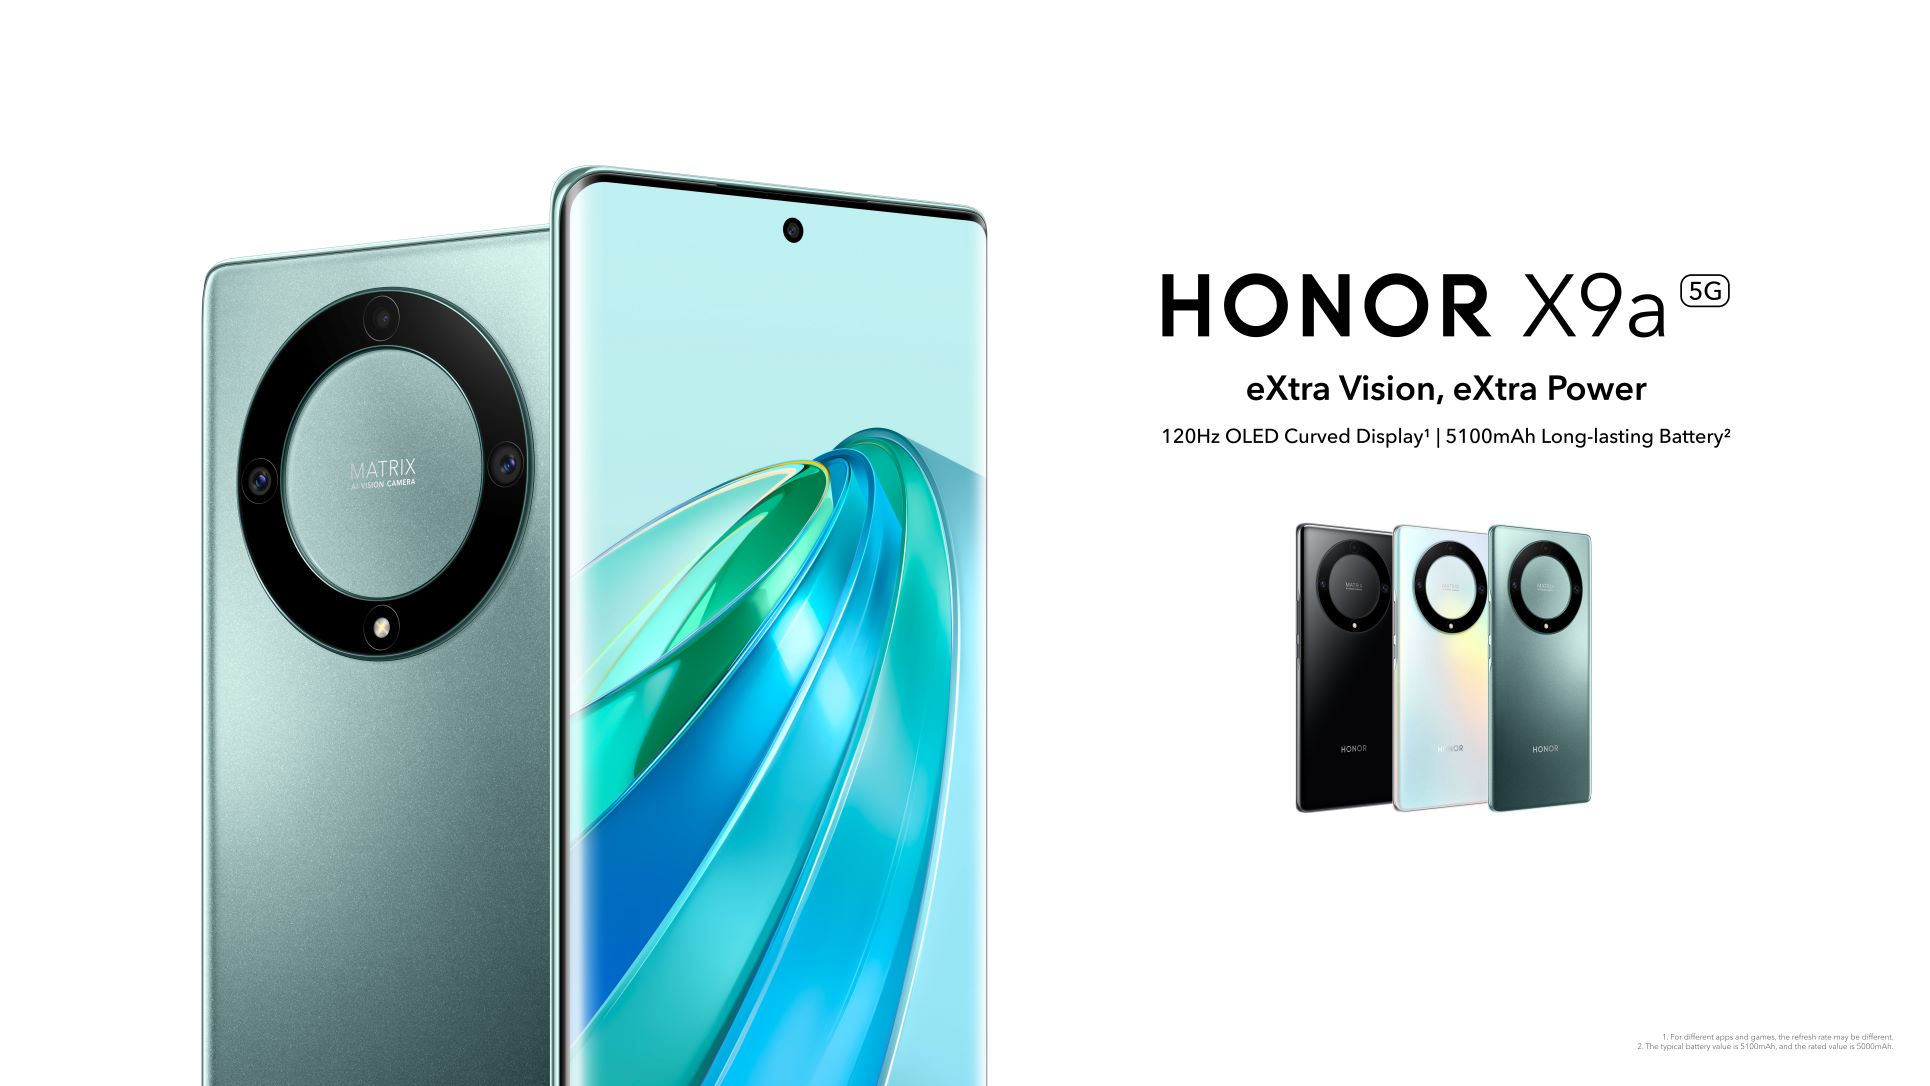 HONOR Delivers Superior Display Experiences with the Launch of HONOR X9a